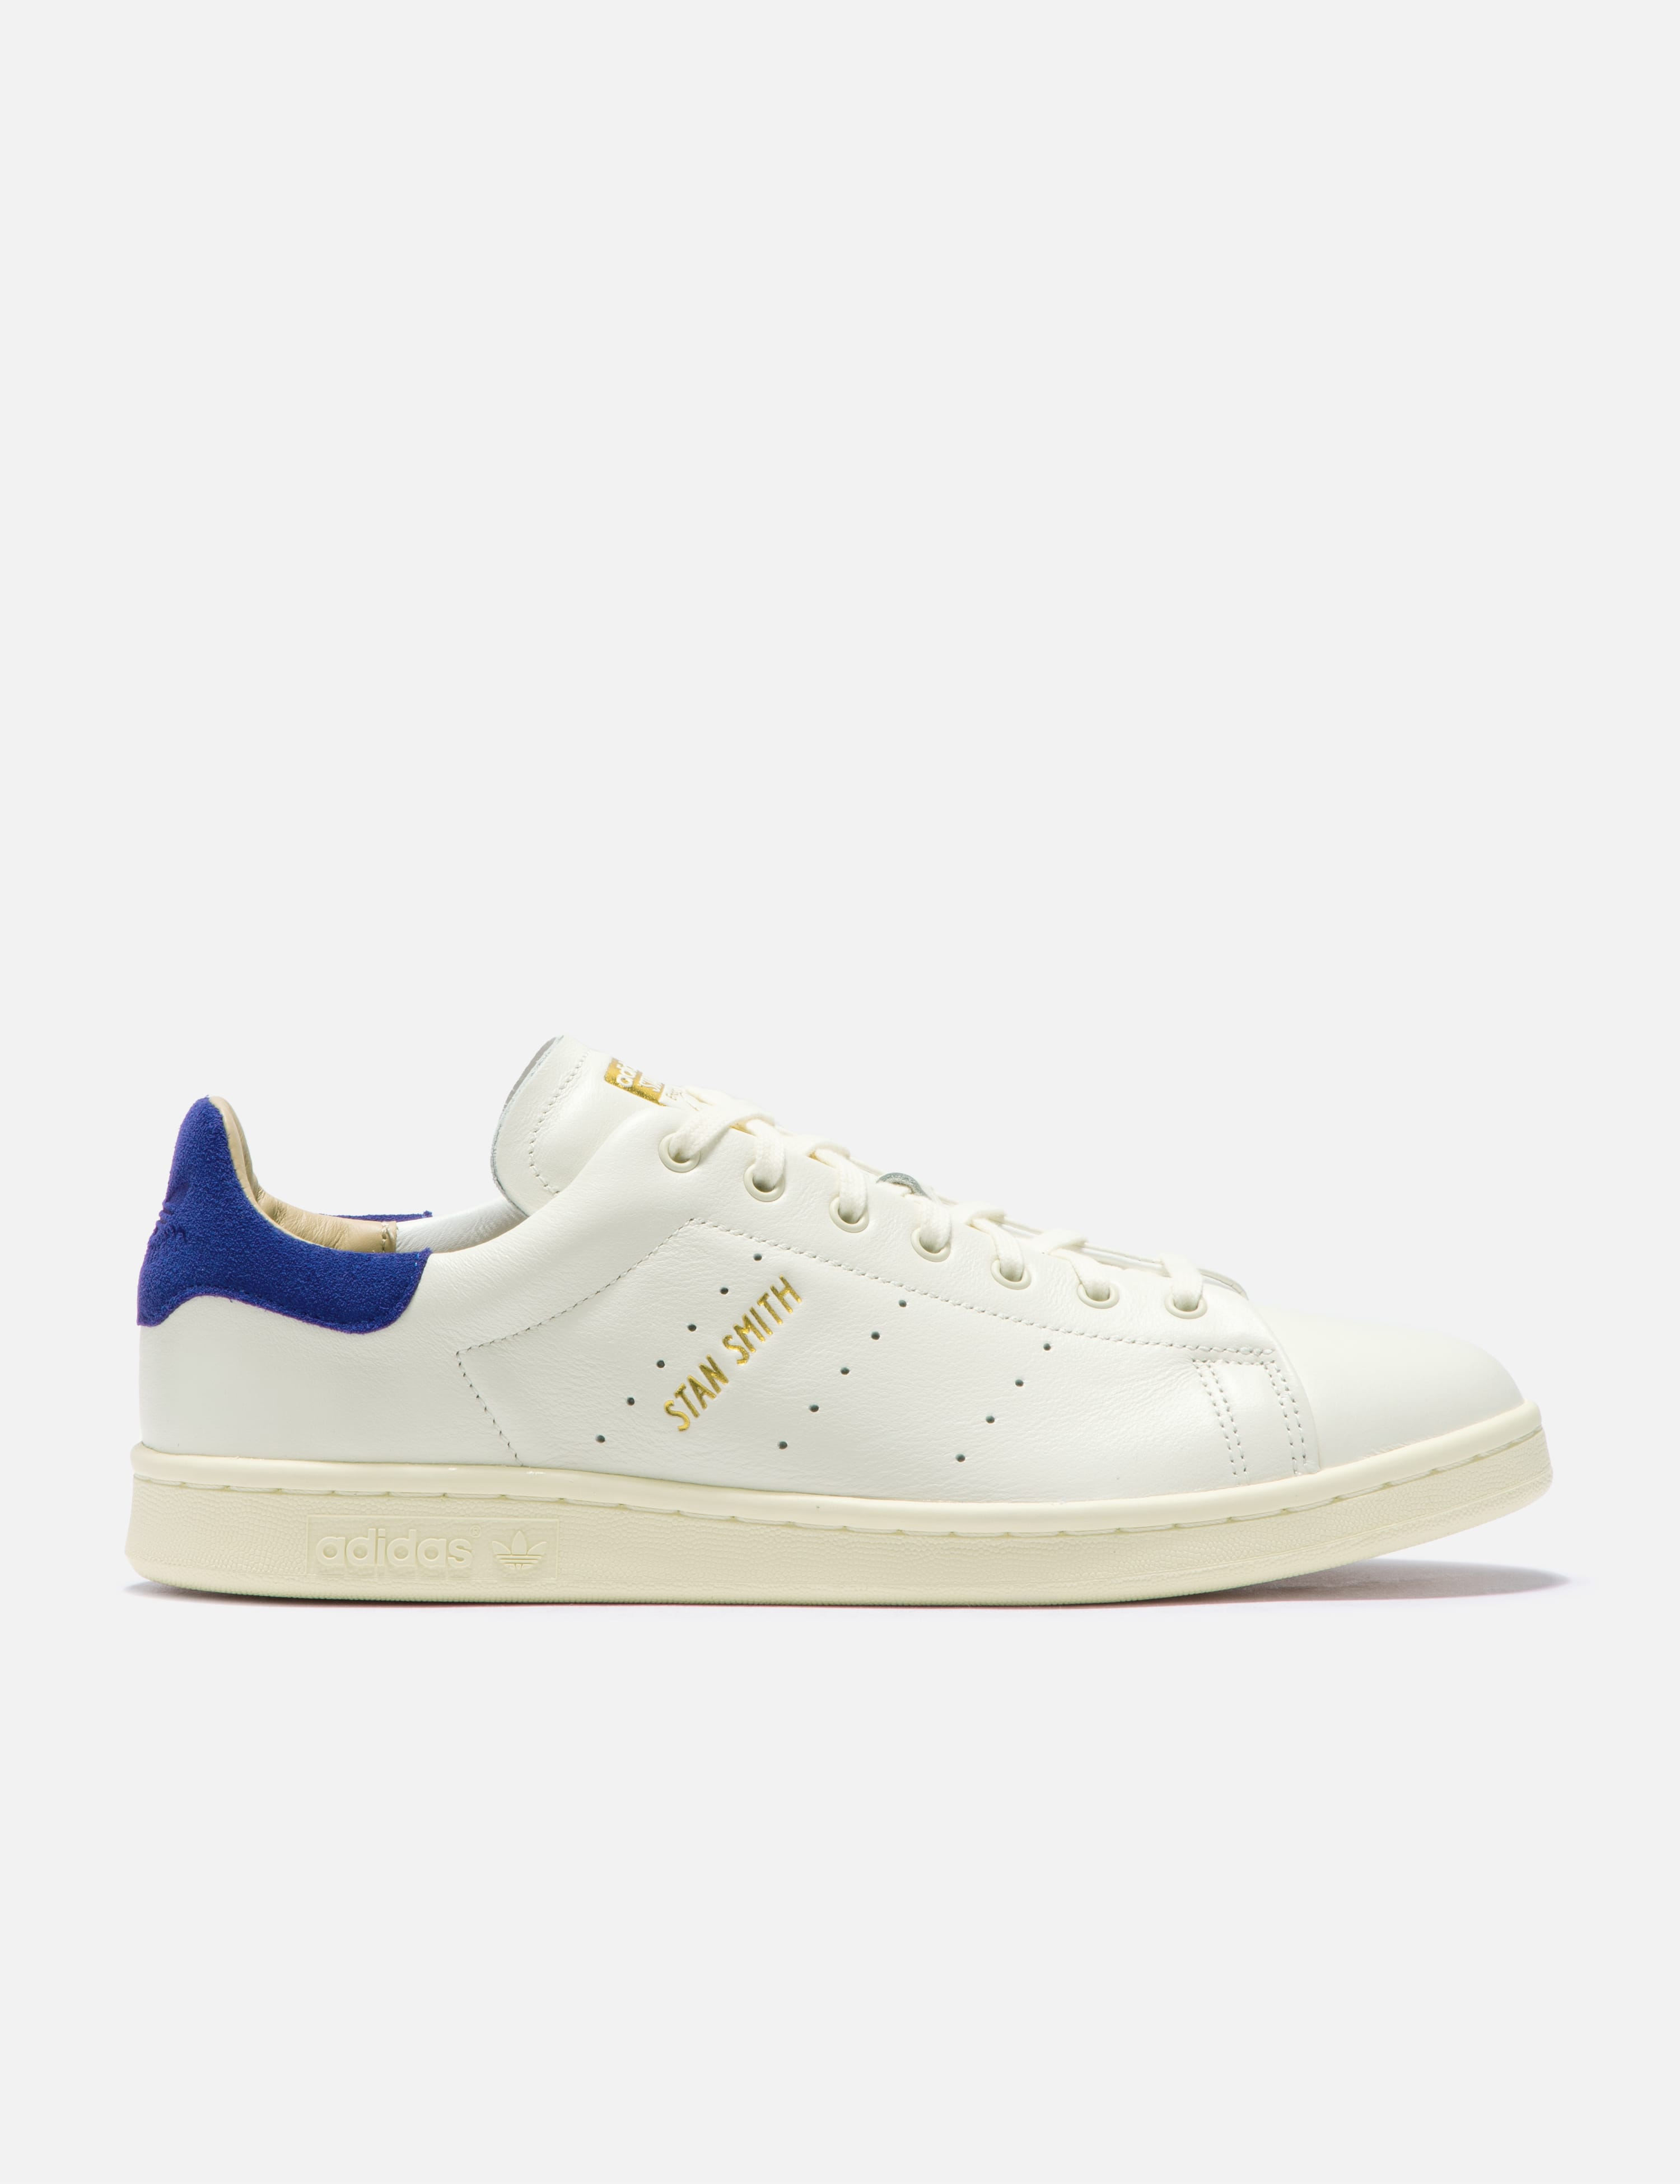 Adidas Originals - STAN SMITH LUX | HBX - Globally Curated Fashion